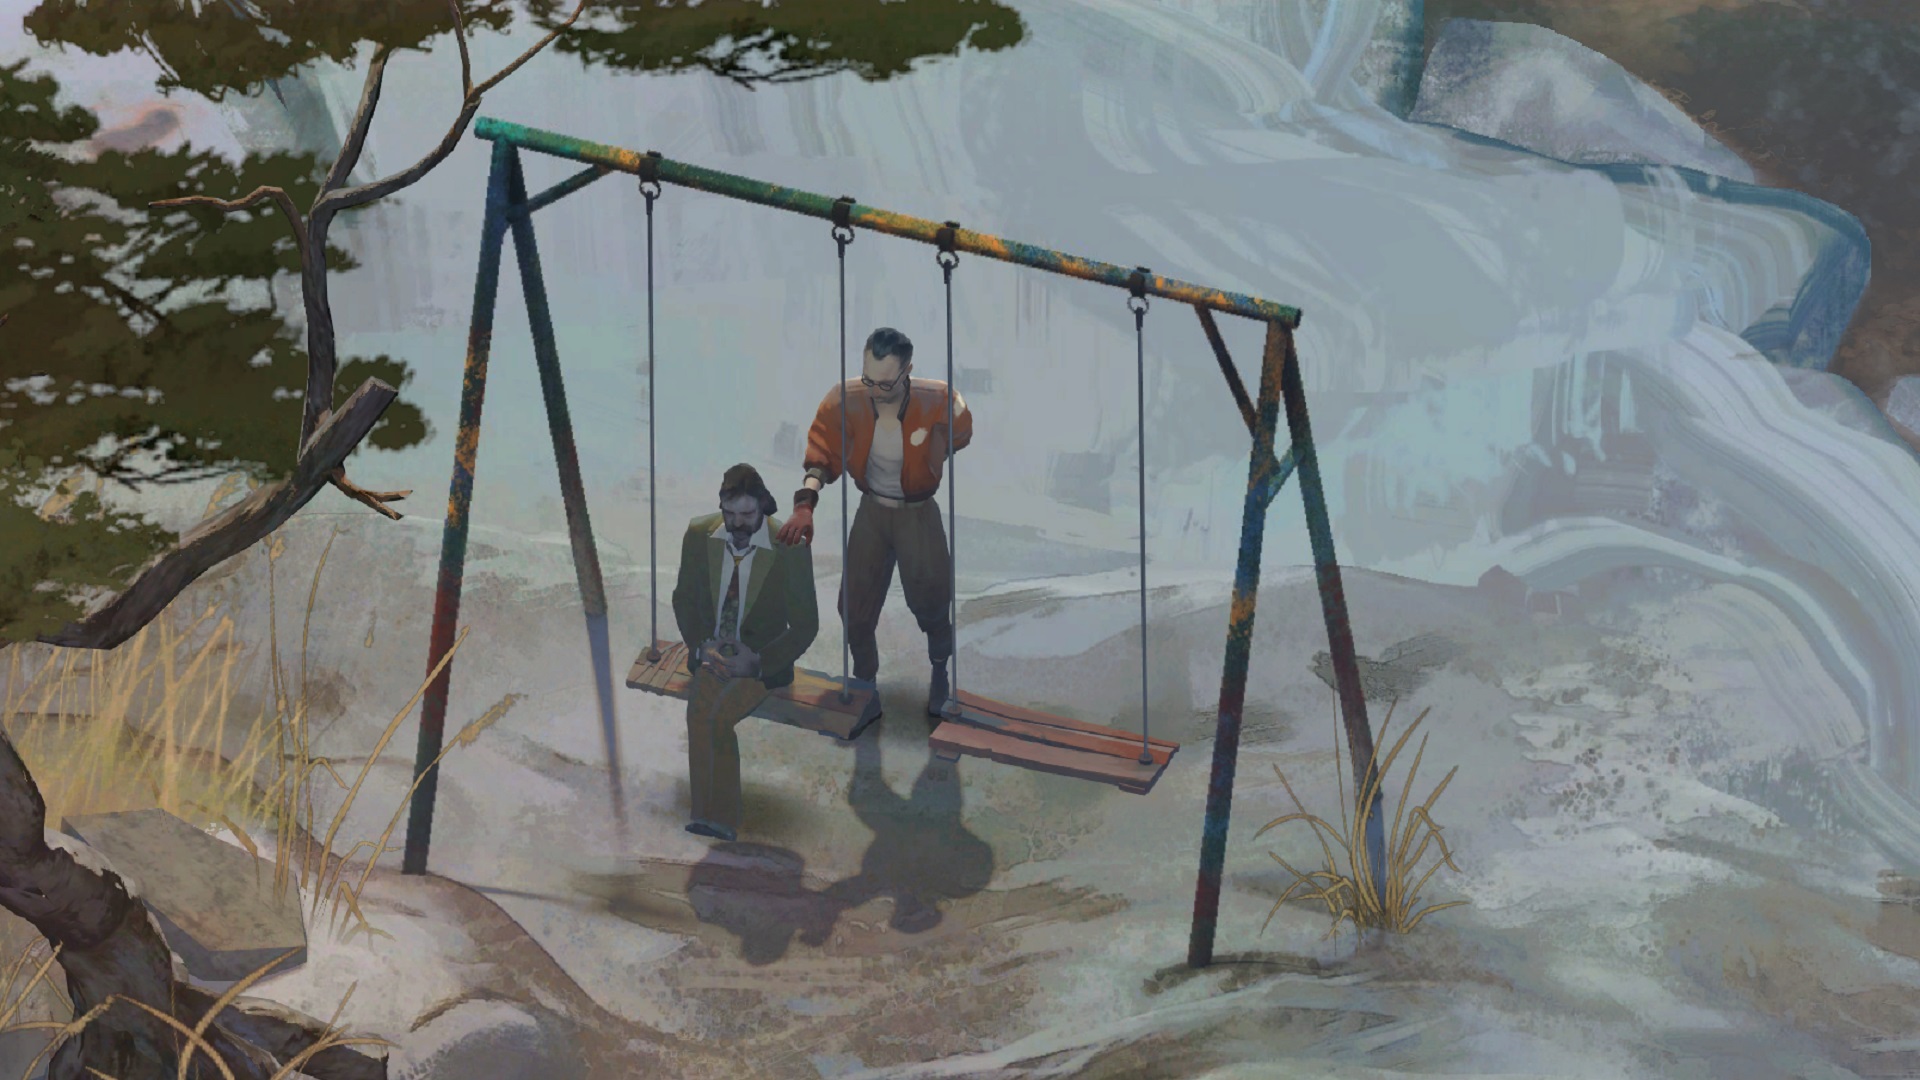 Disco Elysium has a new game mode, and you can play it free right now